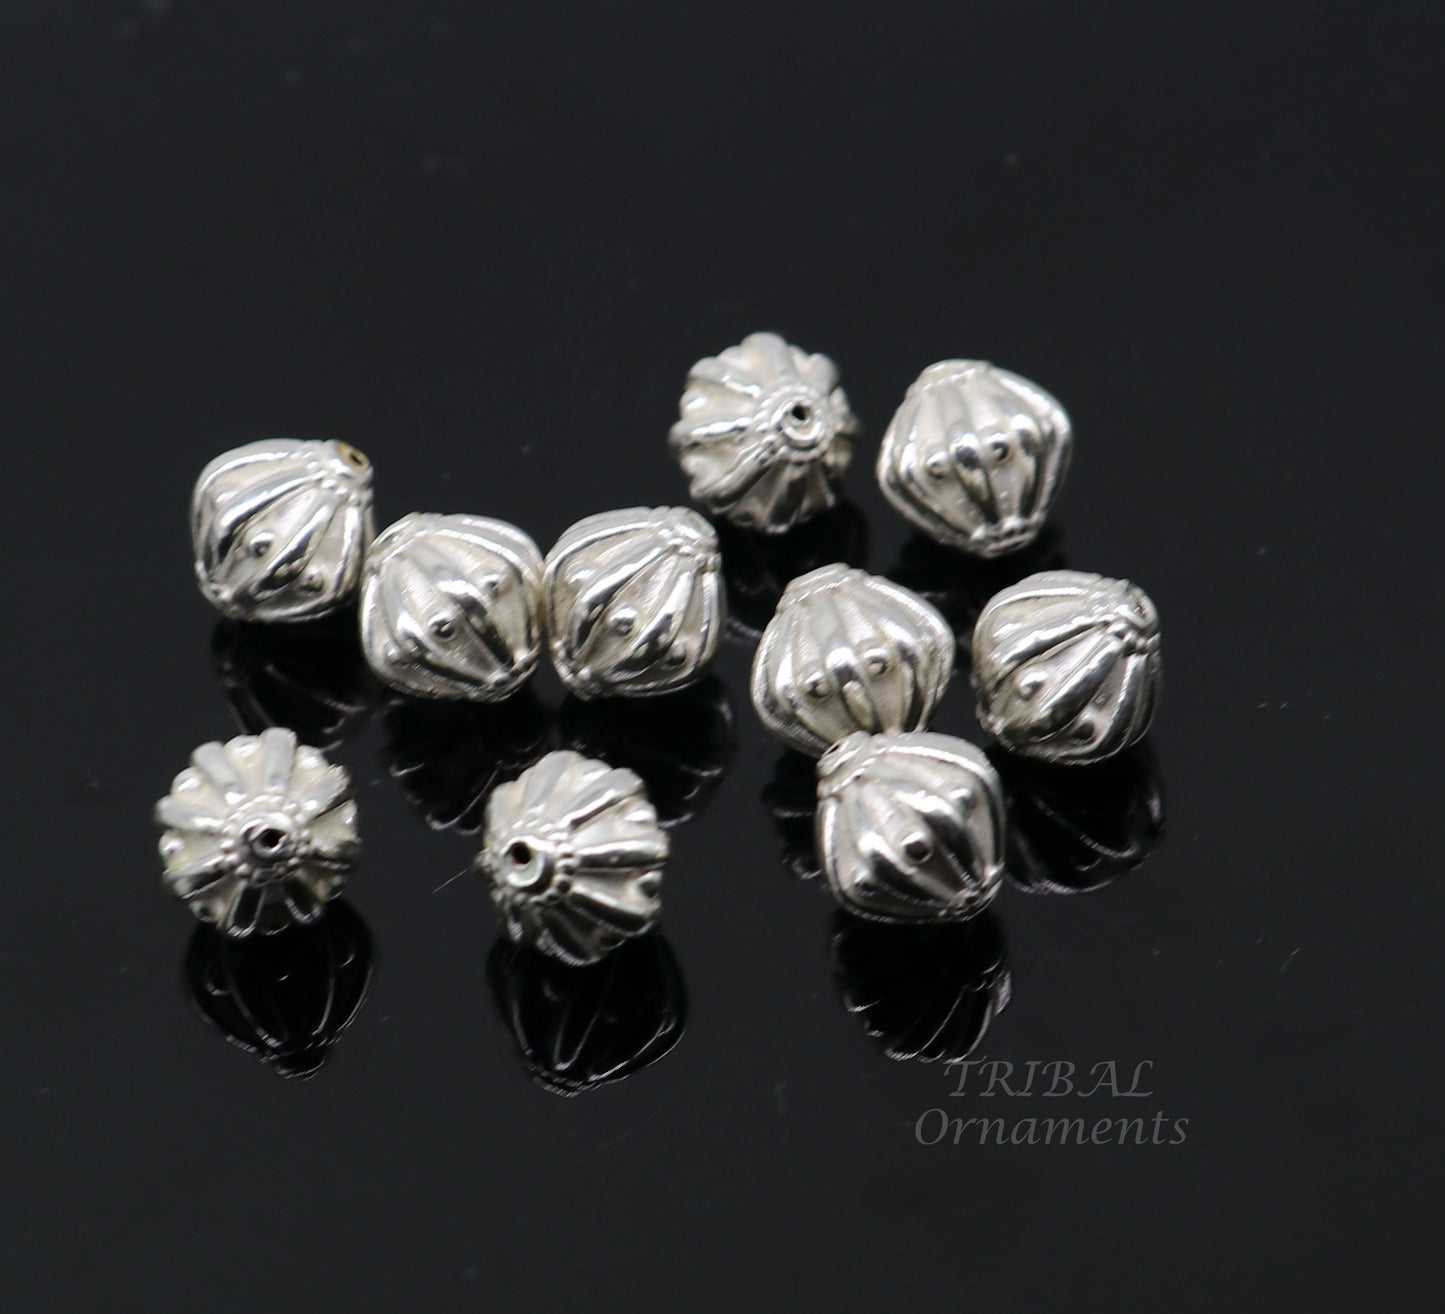 10 mm lot 10 pieces 925 sterling silver fabulous beads drops for custom jewelry making lose beads bd22 - TRIBAL ORNAMENTS